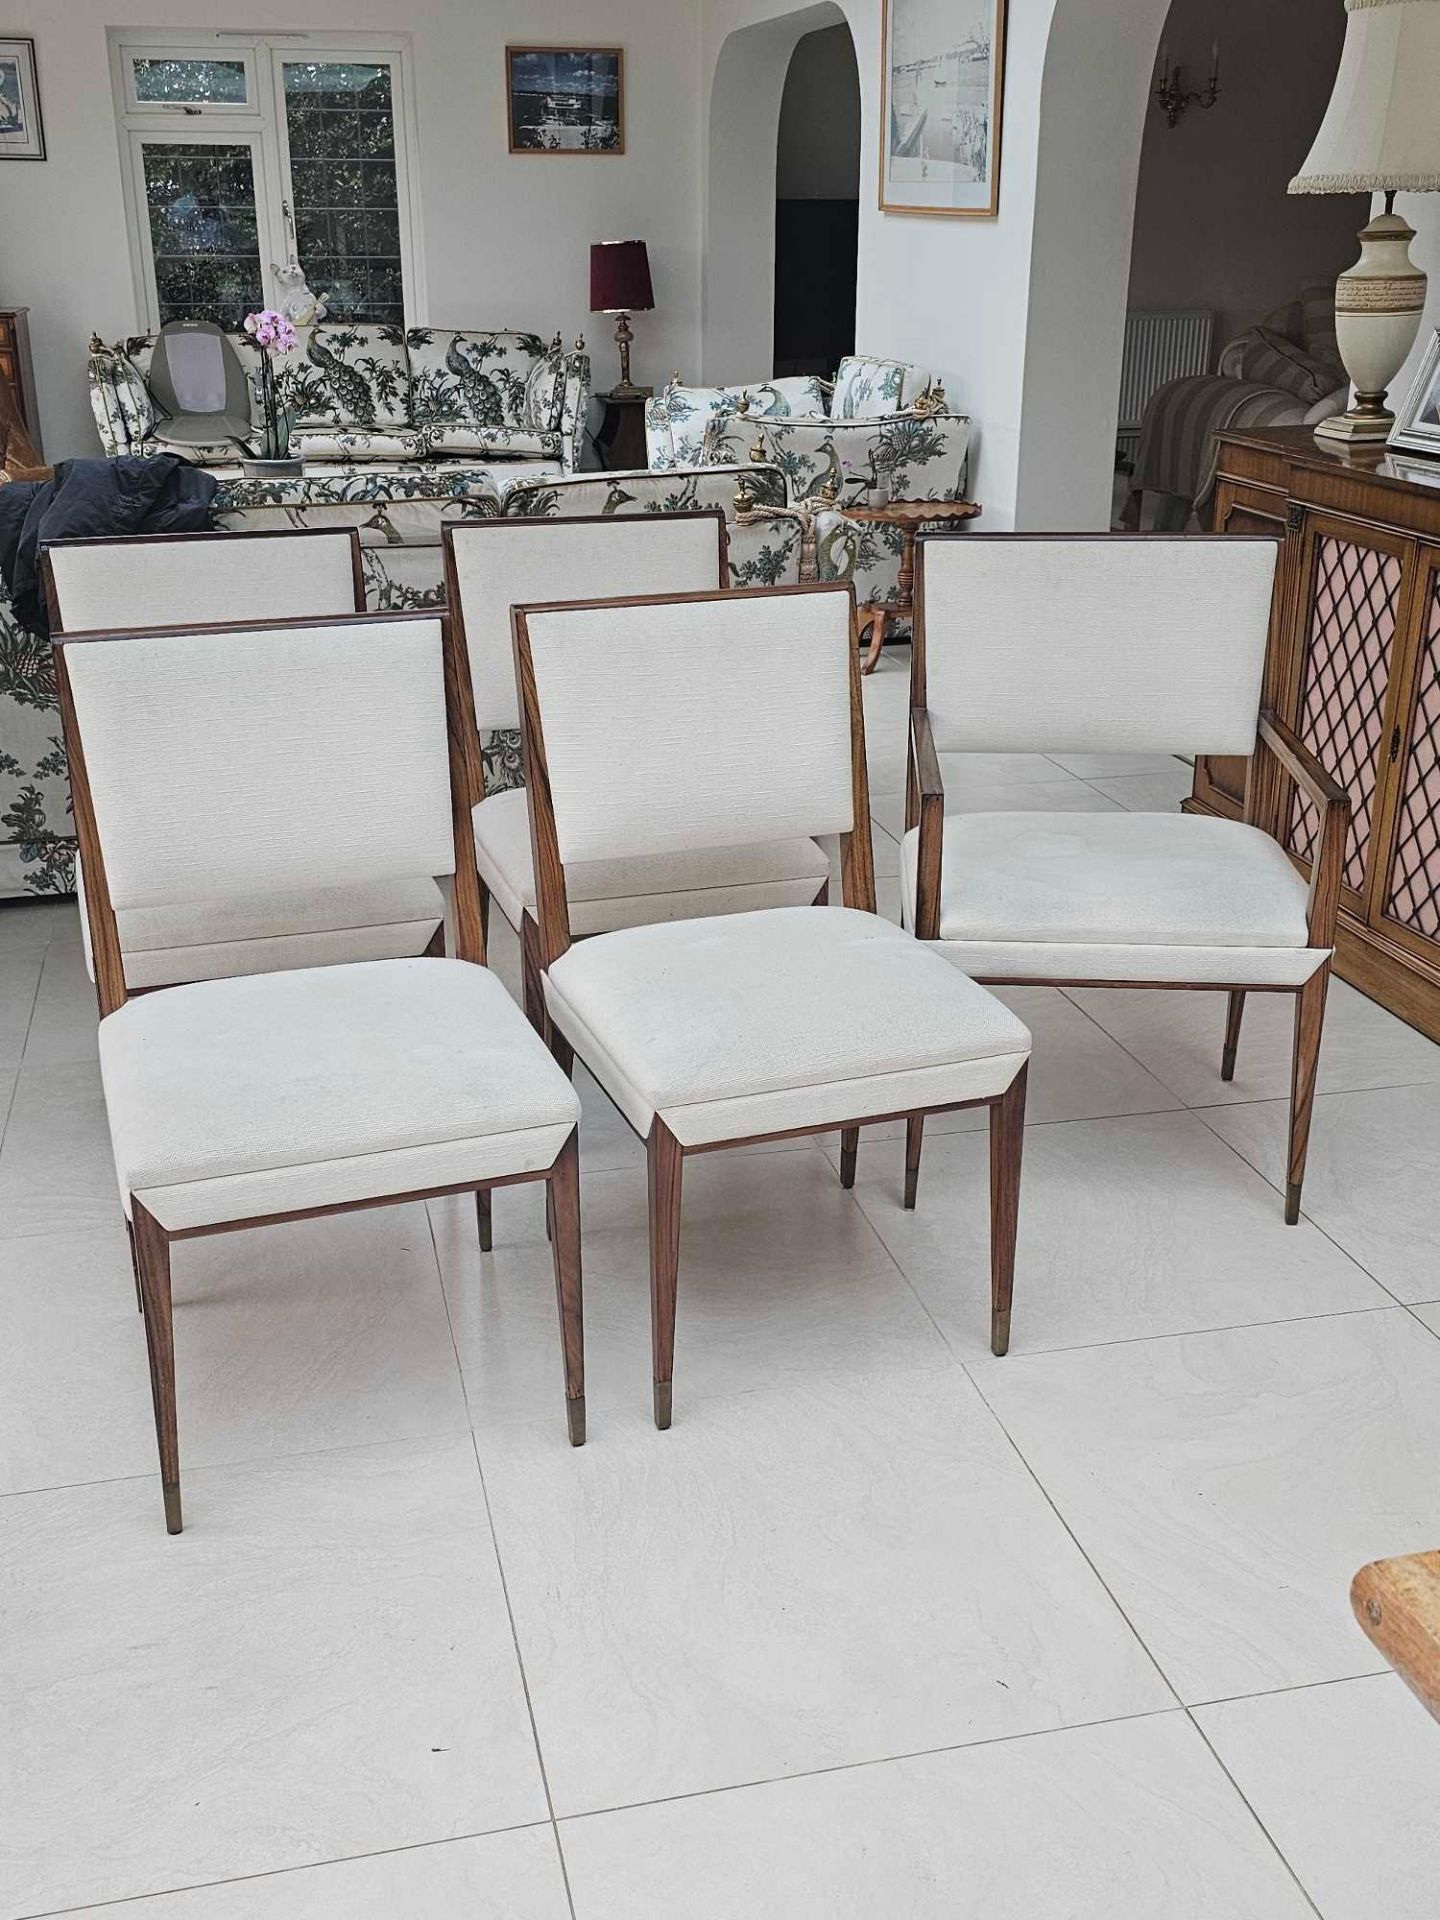 Tracey Boyd Reform Side Chairs Upholstered In Madison Dove X 4 Complete With A Armchair To Match - Image 2 of 5